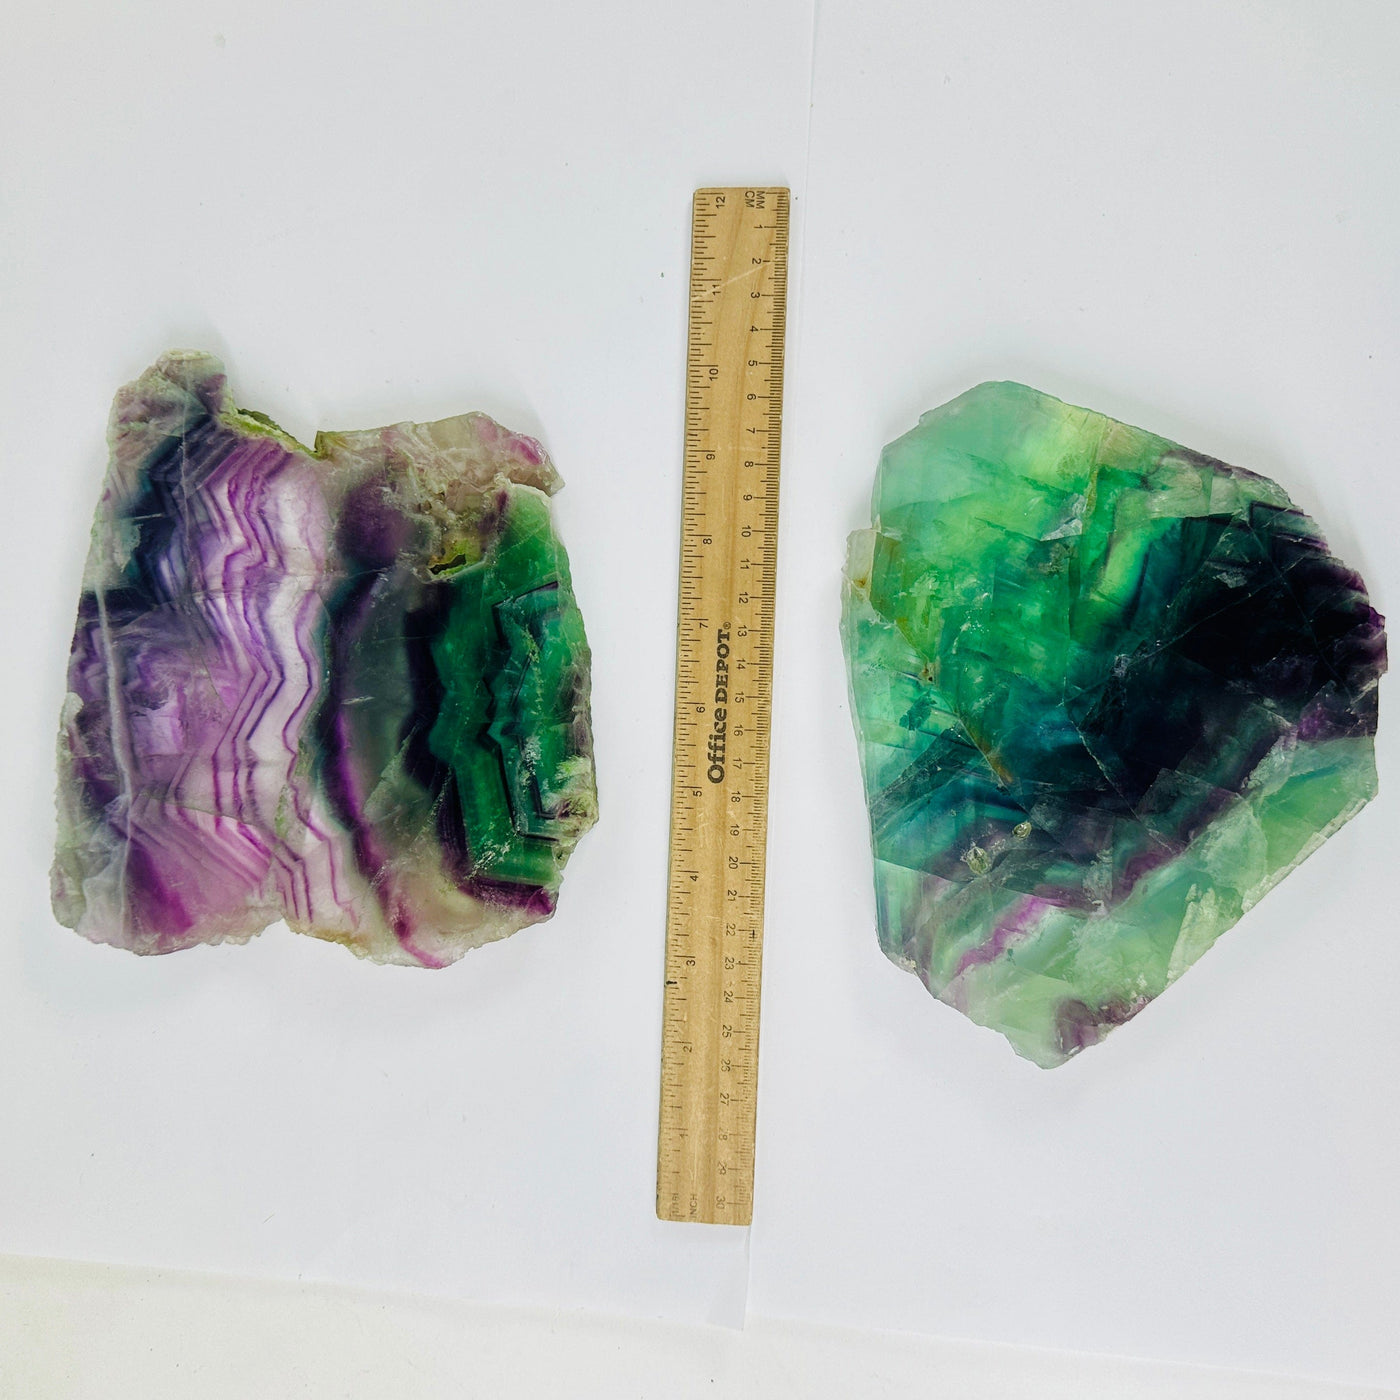 Rainbow Fluorite AA Grade Slab - Large Crystal Slab - You Choose - variants 3 4 with ruler for size reference